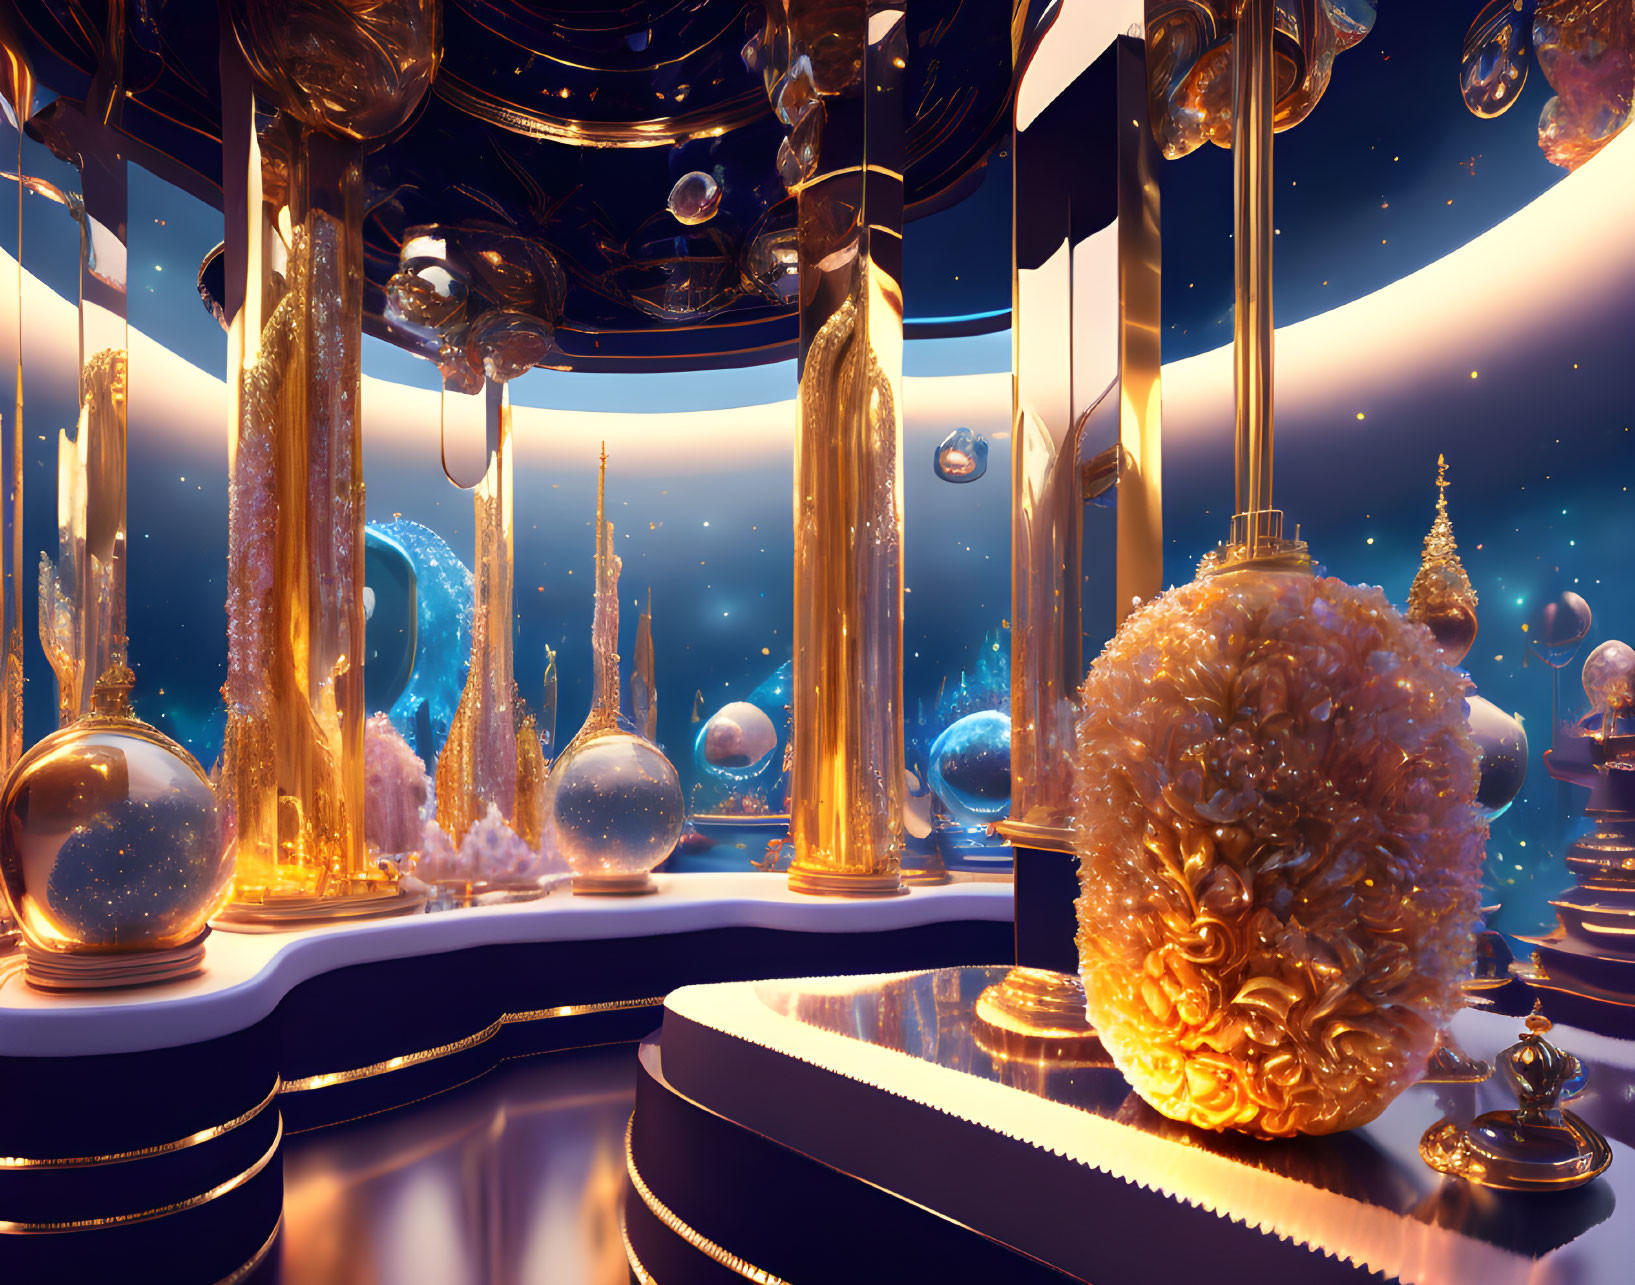 Luxurious futuristic room with golden columns, glass ornaments, and cosmic backdrop